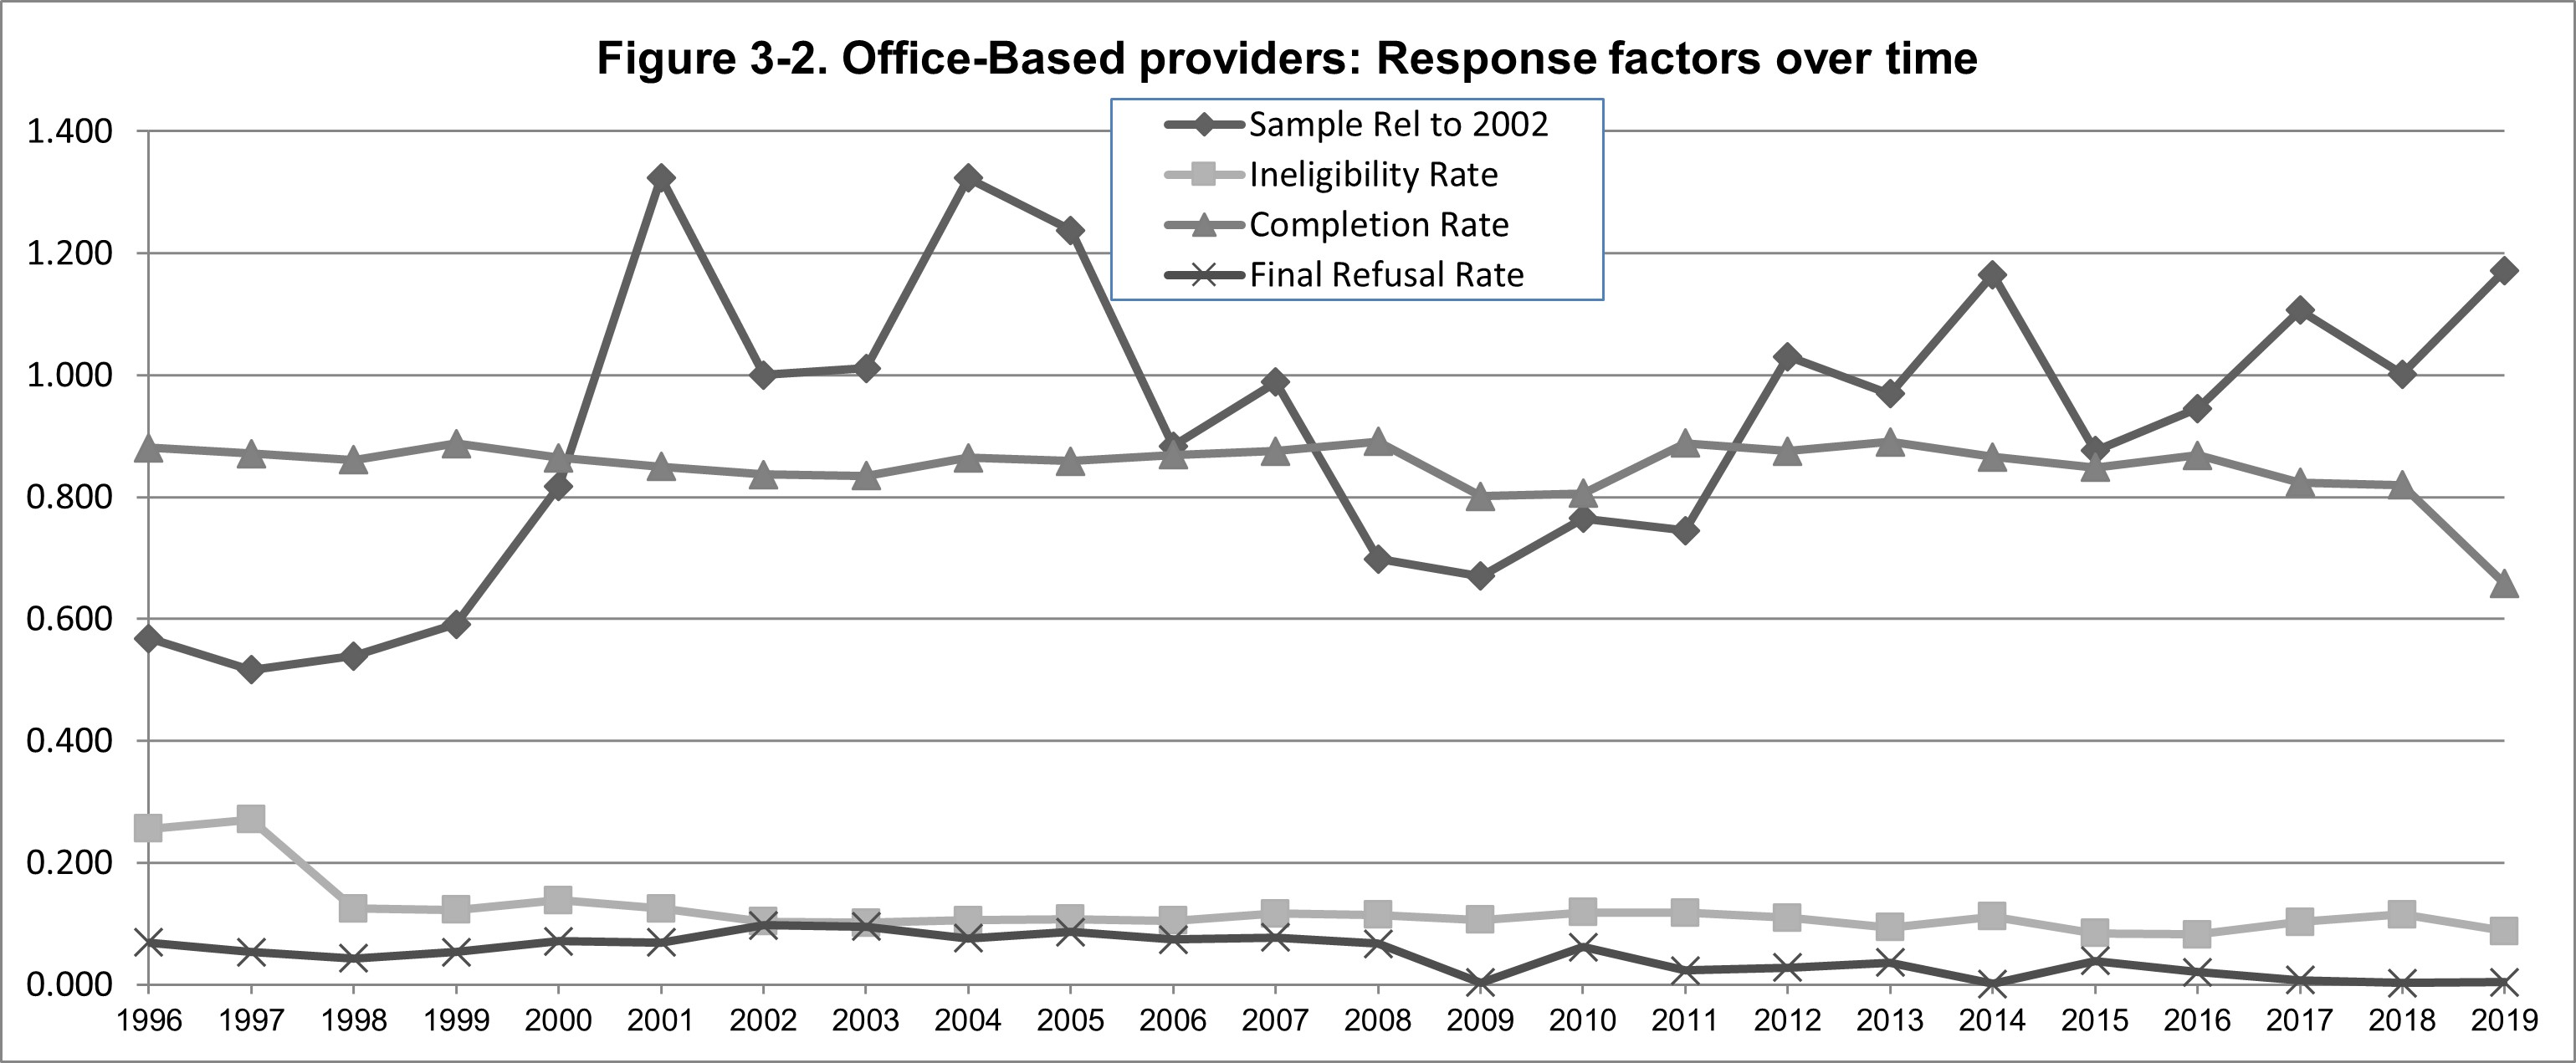 Image displaying response factors over time, from 1996 through 2019 for office based providers